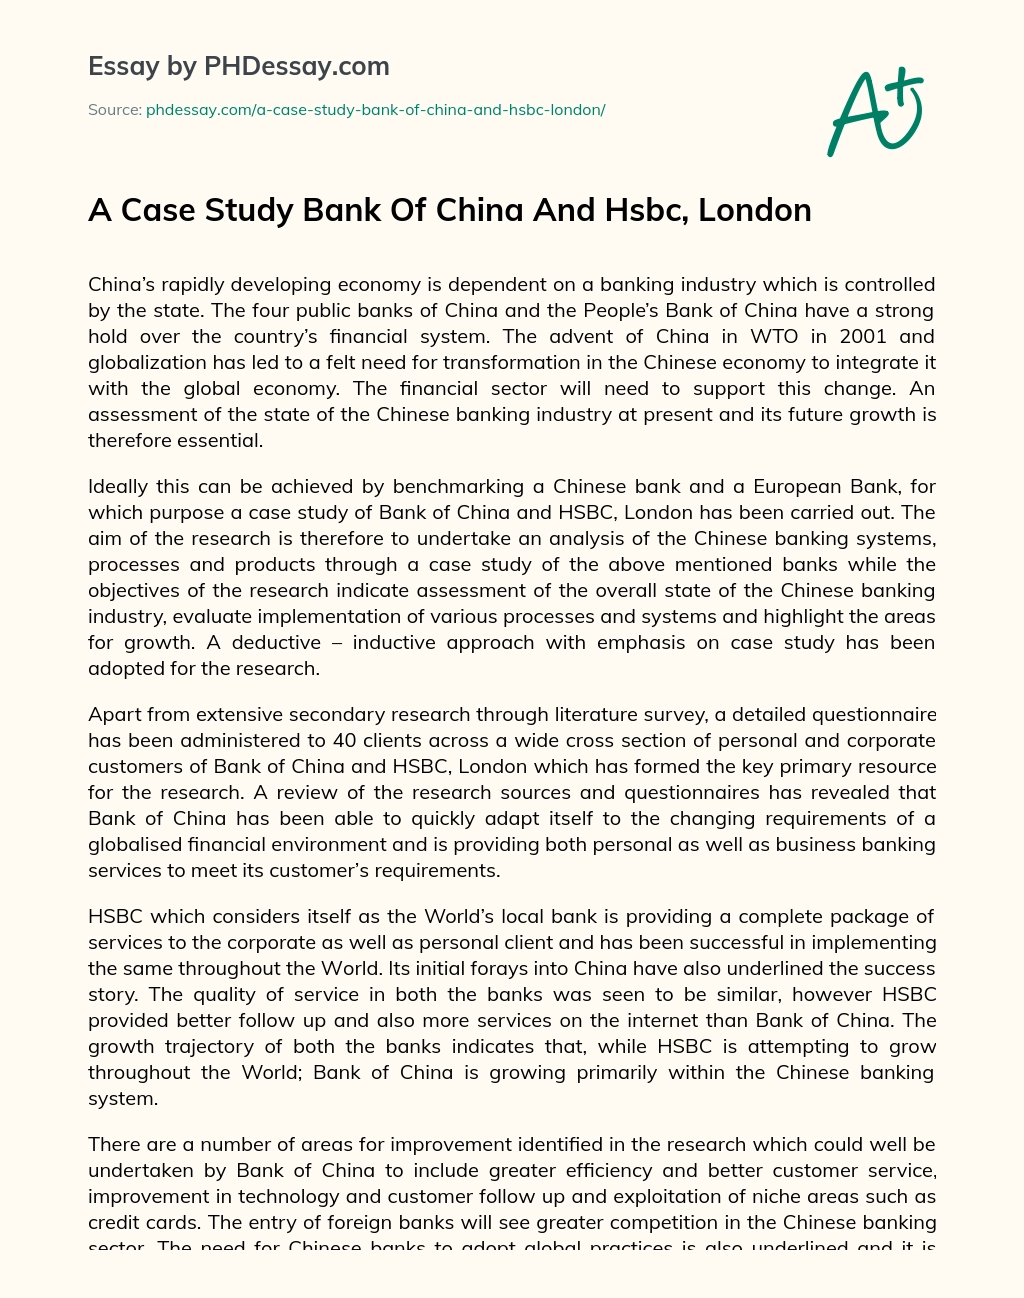 A Case Study Bank Of China And Hsbc, London essay